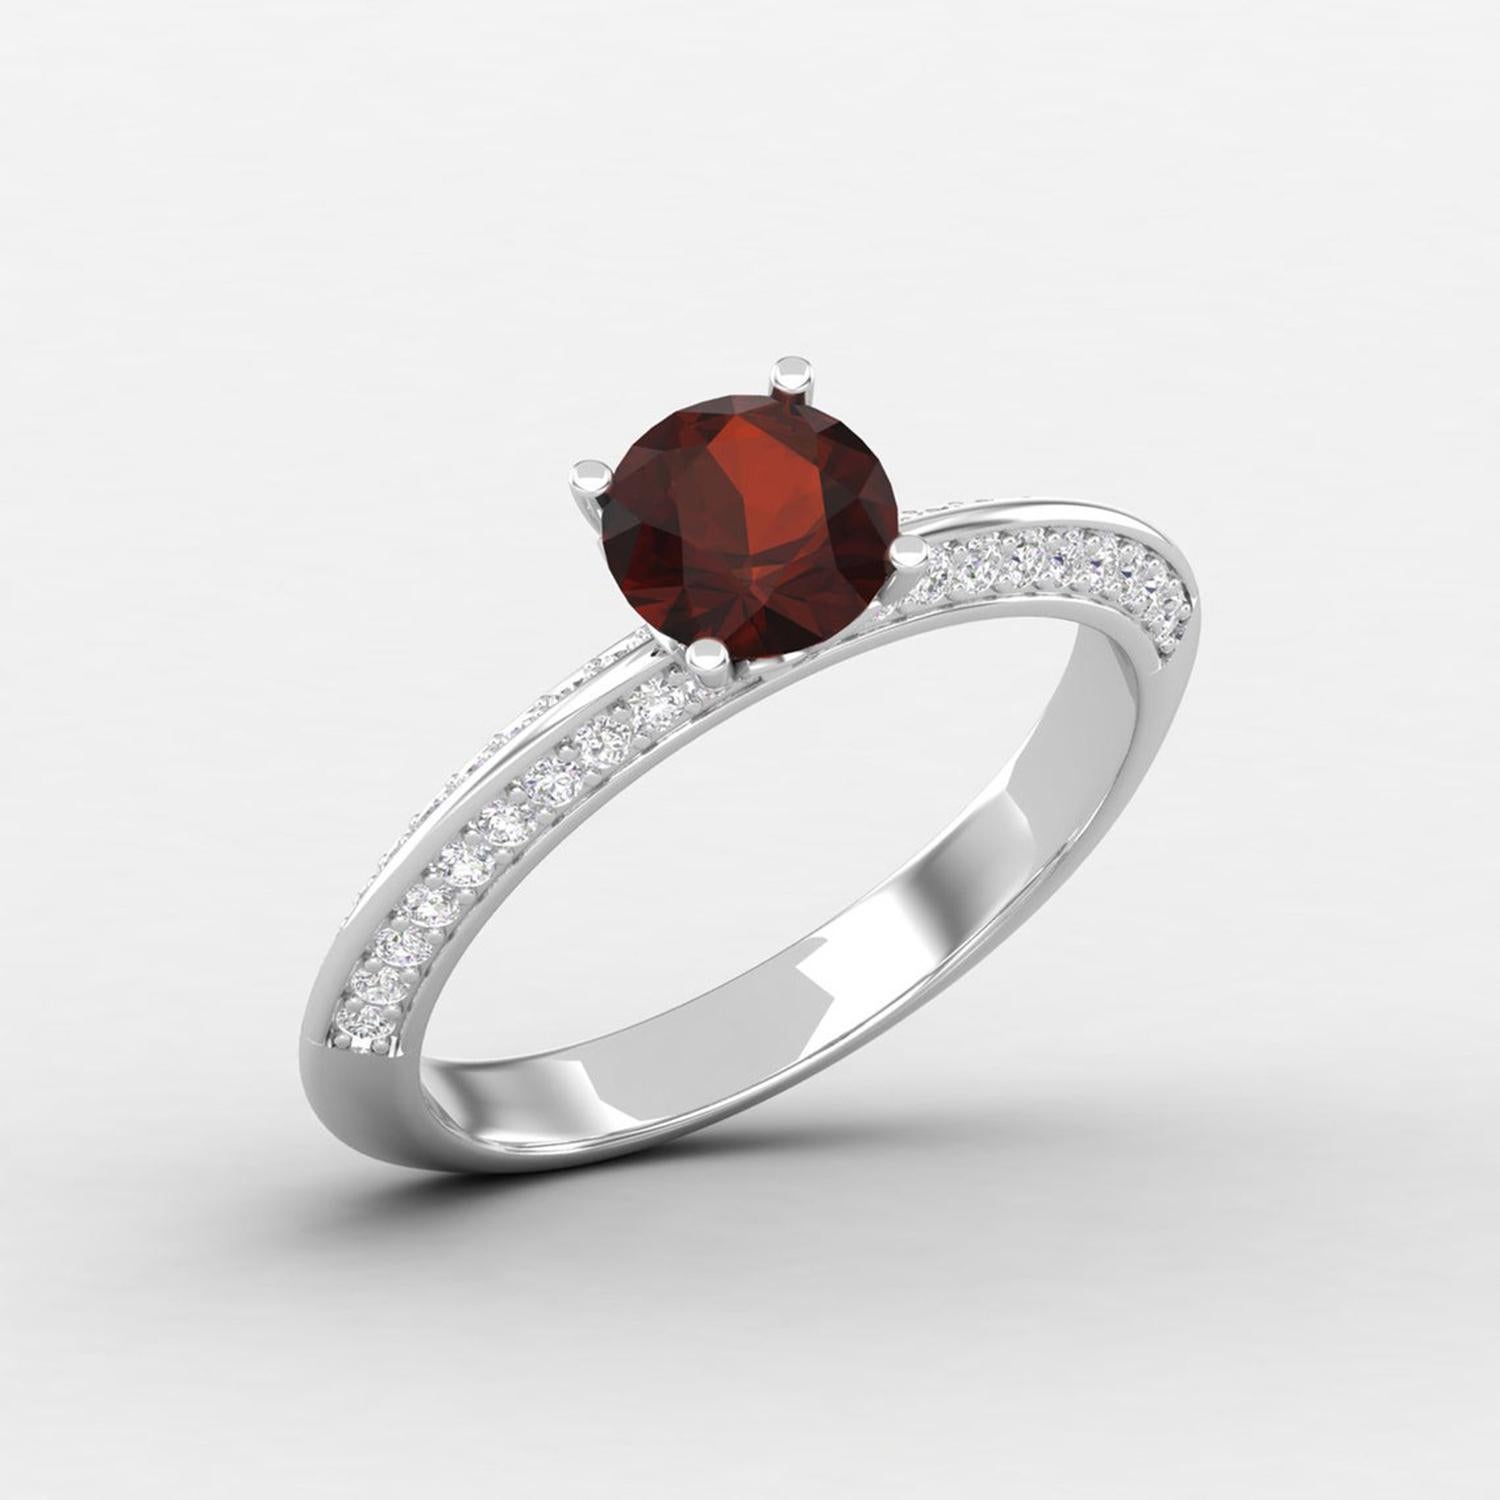 Round Cut 14 K Gold Orange Garnet Ring / Diamond Solitaire Ring / Engagement Ring for Her For Sale